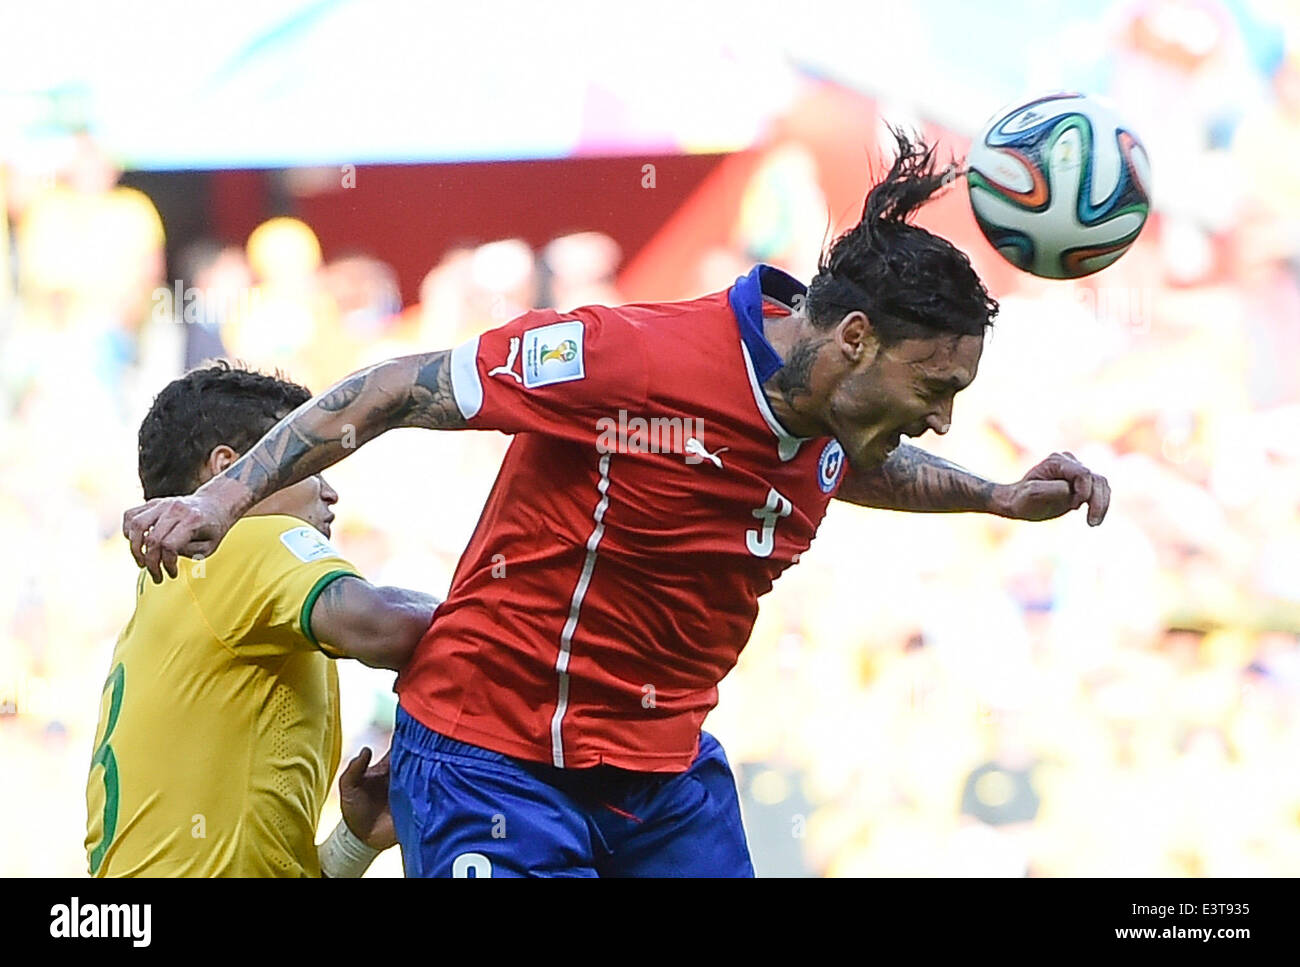 Belo Horizonte, Brazil. 28th June, 2014. Chile's Mauricio Pinilla (R) heads the ball during a Round of 16 match between Brazil and Chile of 2014 FIFA World Cup at the Estadio Mineirao Stadium in Belo Horizonte, Brazil, on June 28, 2014. Brazil won 4-3 (3-2 in penalties) over Chile and qualified for Quarter-finals on Saturday. Credit:  Qi Heng/Xinhua/Alamy Live News Stock Photo